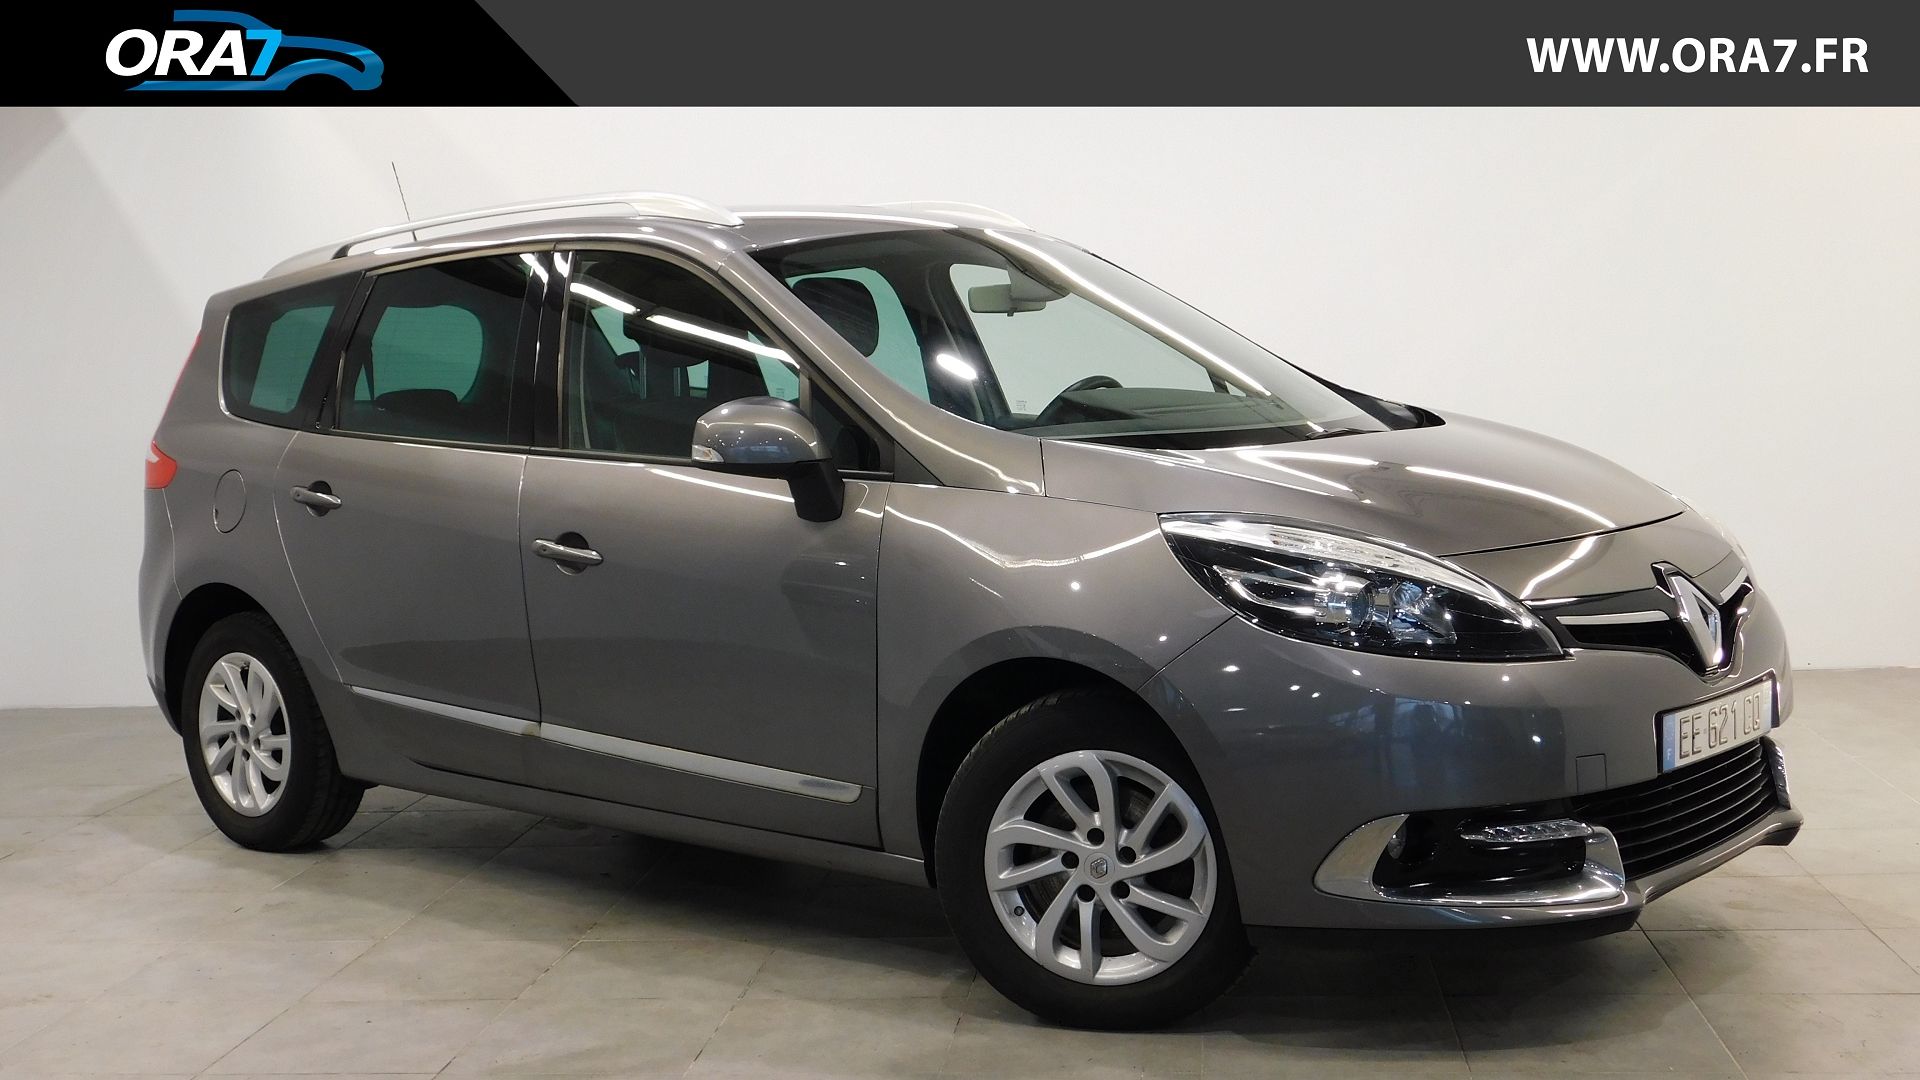 RENAULT GRAND SCENIC 3 1.5 DCI 110CH ENERGY BUSINESS ECO² EURO6 7 PLACES 2015